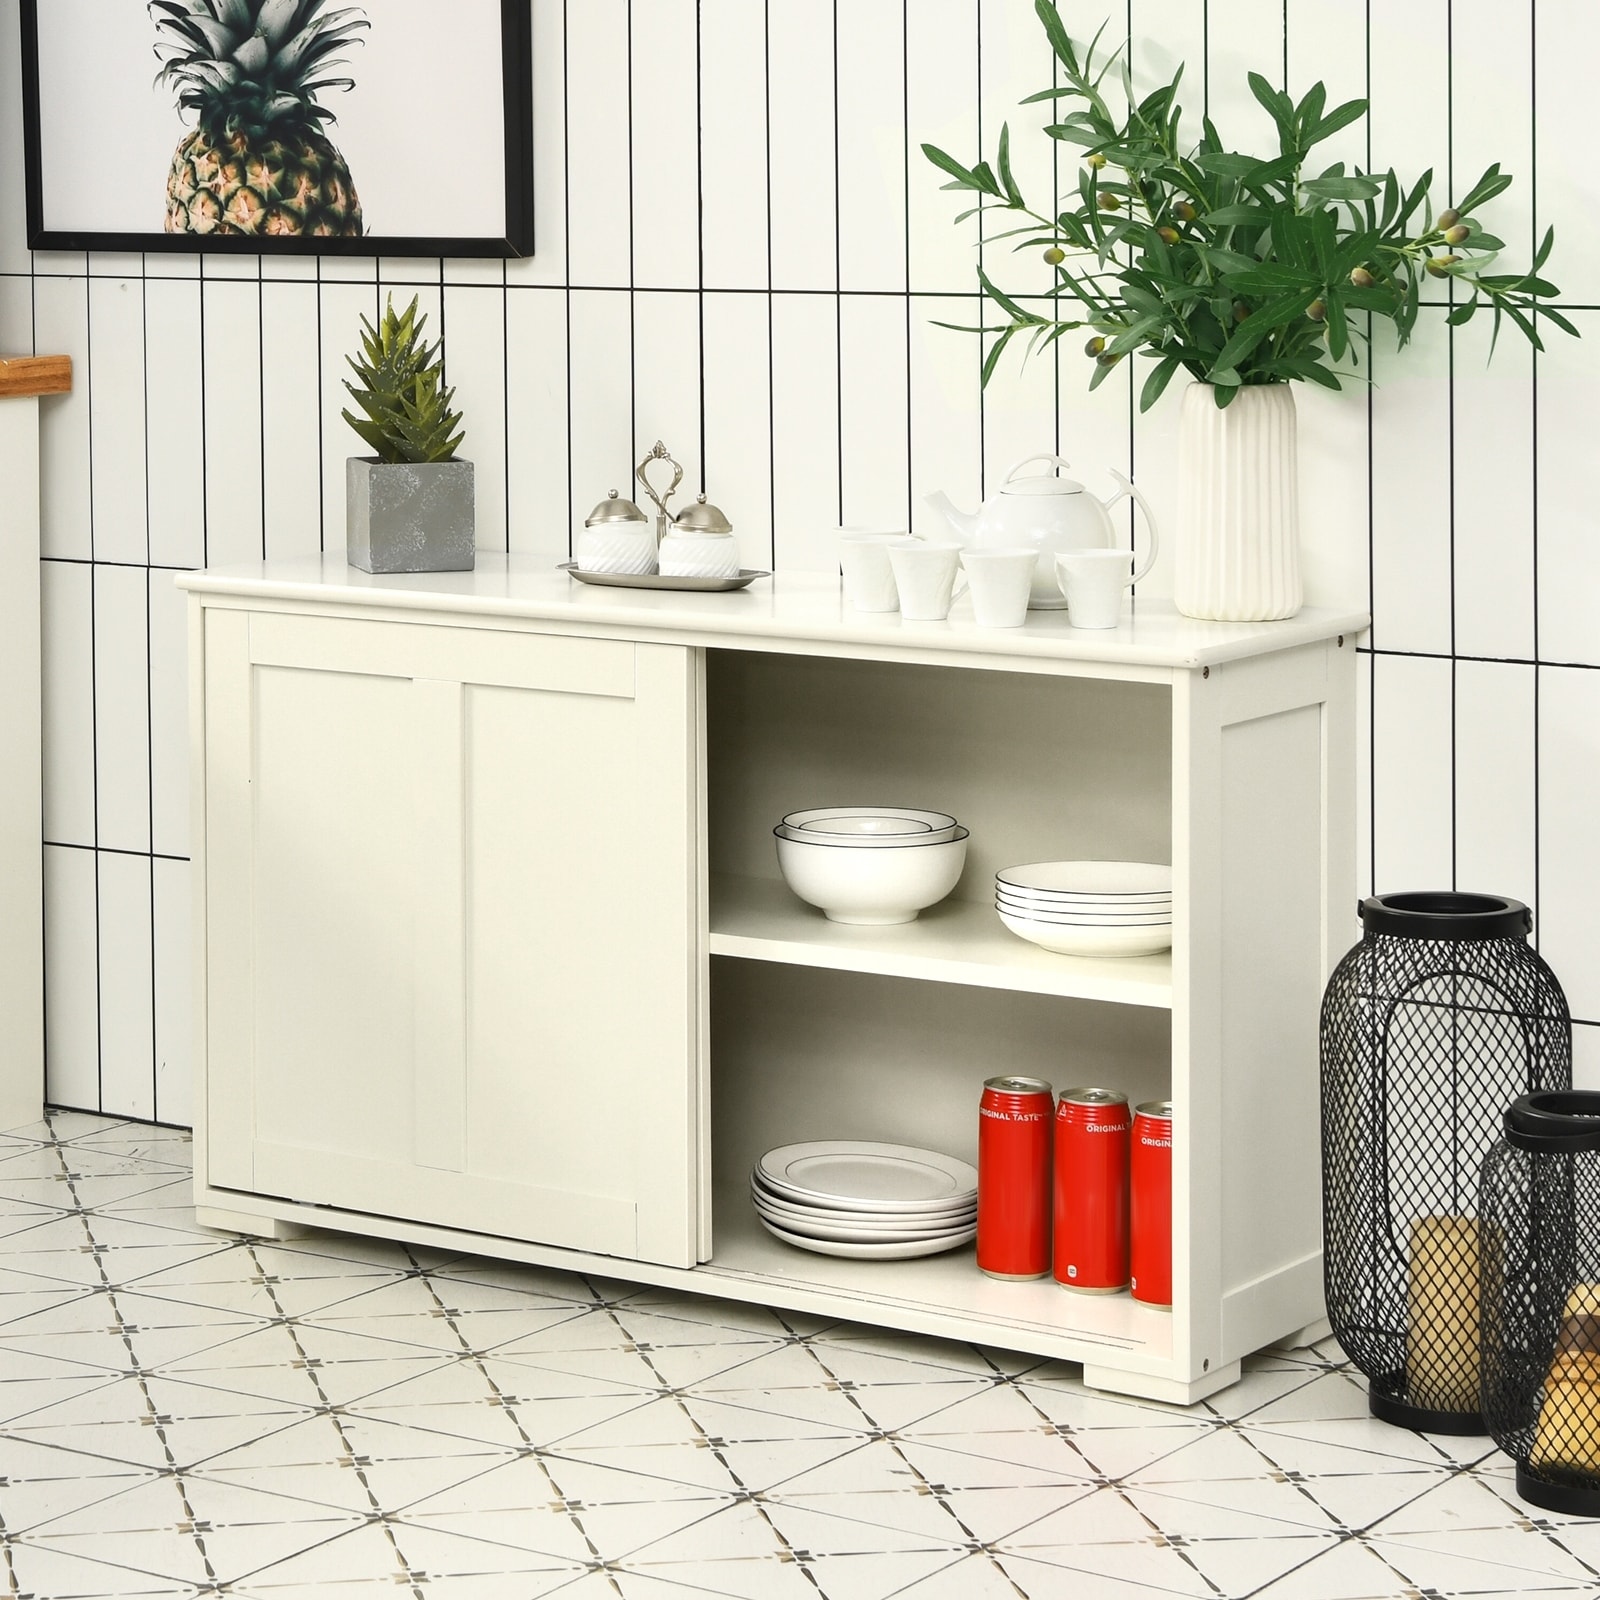 https://ak1.ostkcdn.com/images/products/is/images/direct/110e2f6c8ac6f991f7dfe0e3d9aefb5c265ef4bc/Antique-Stackable-Kitchen-Storage-Sideboard-with-Height-Adjustable-Shelf.jpg